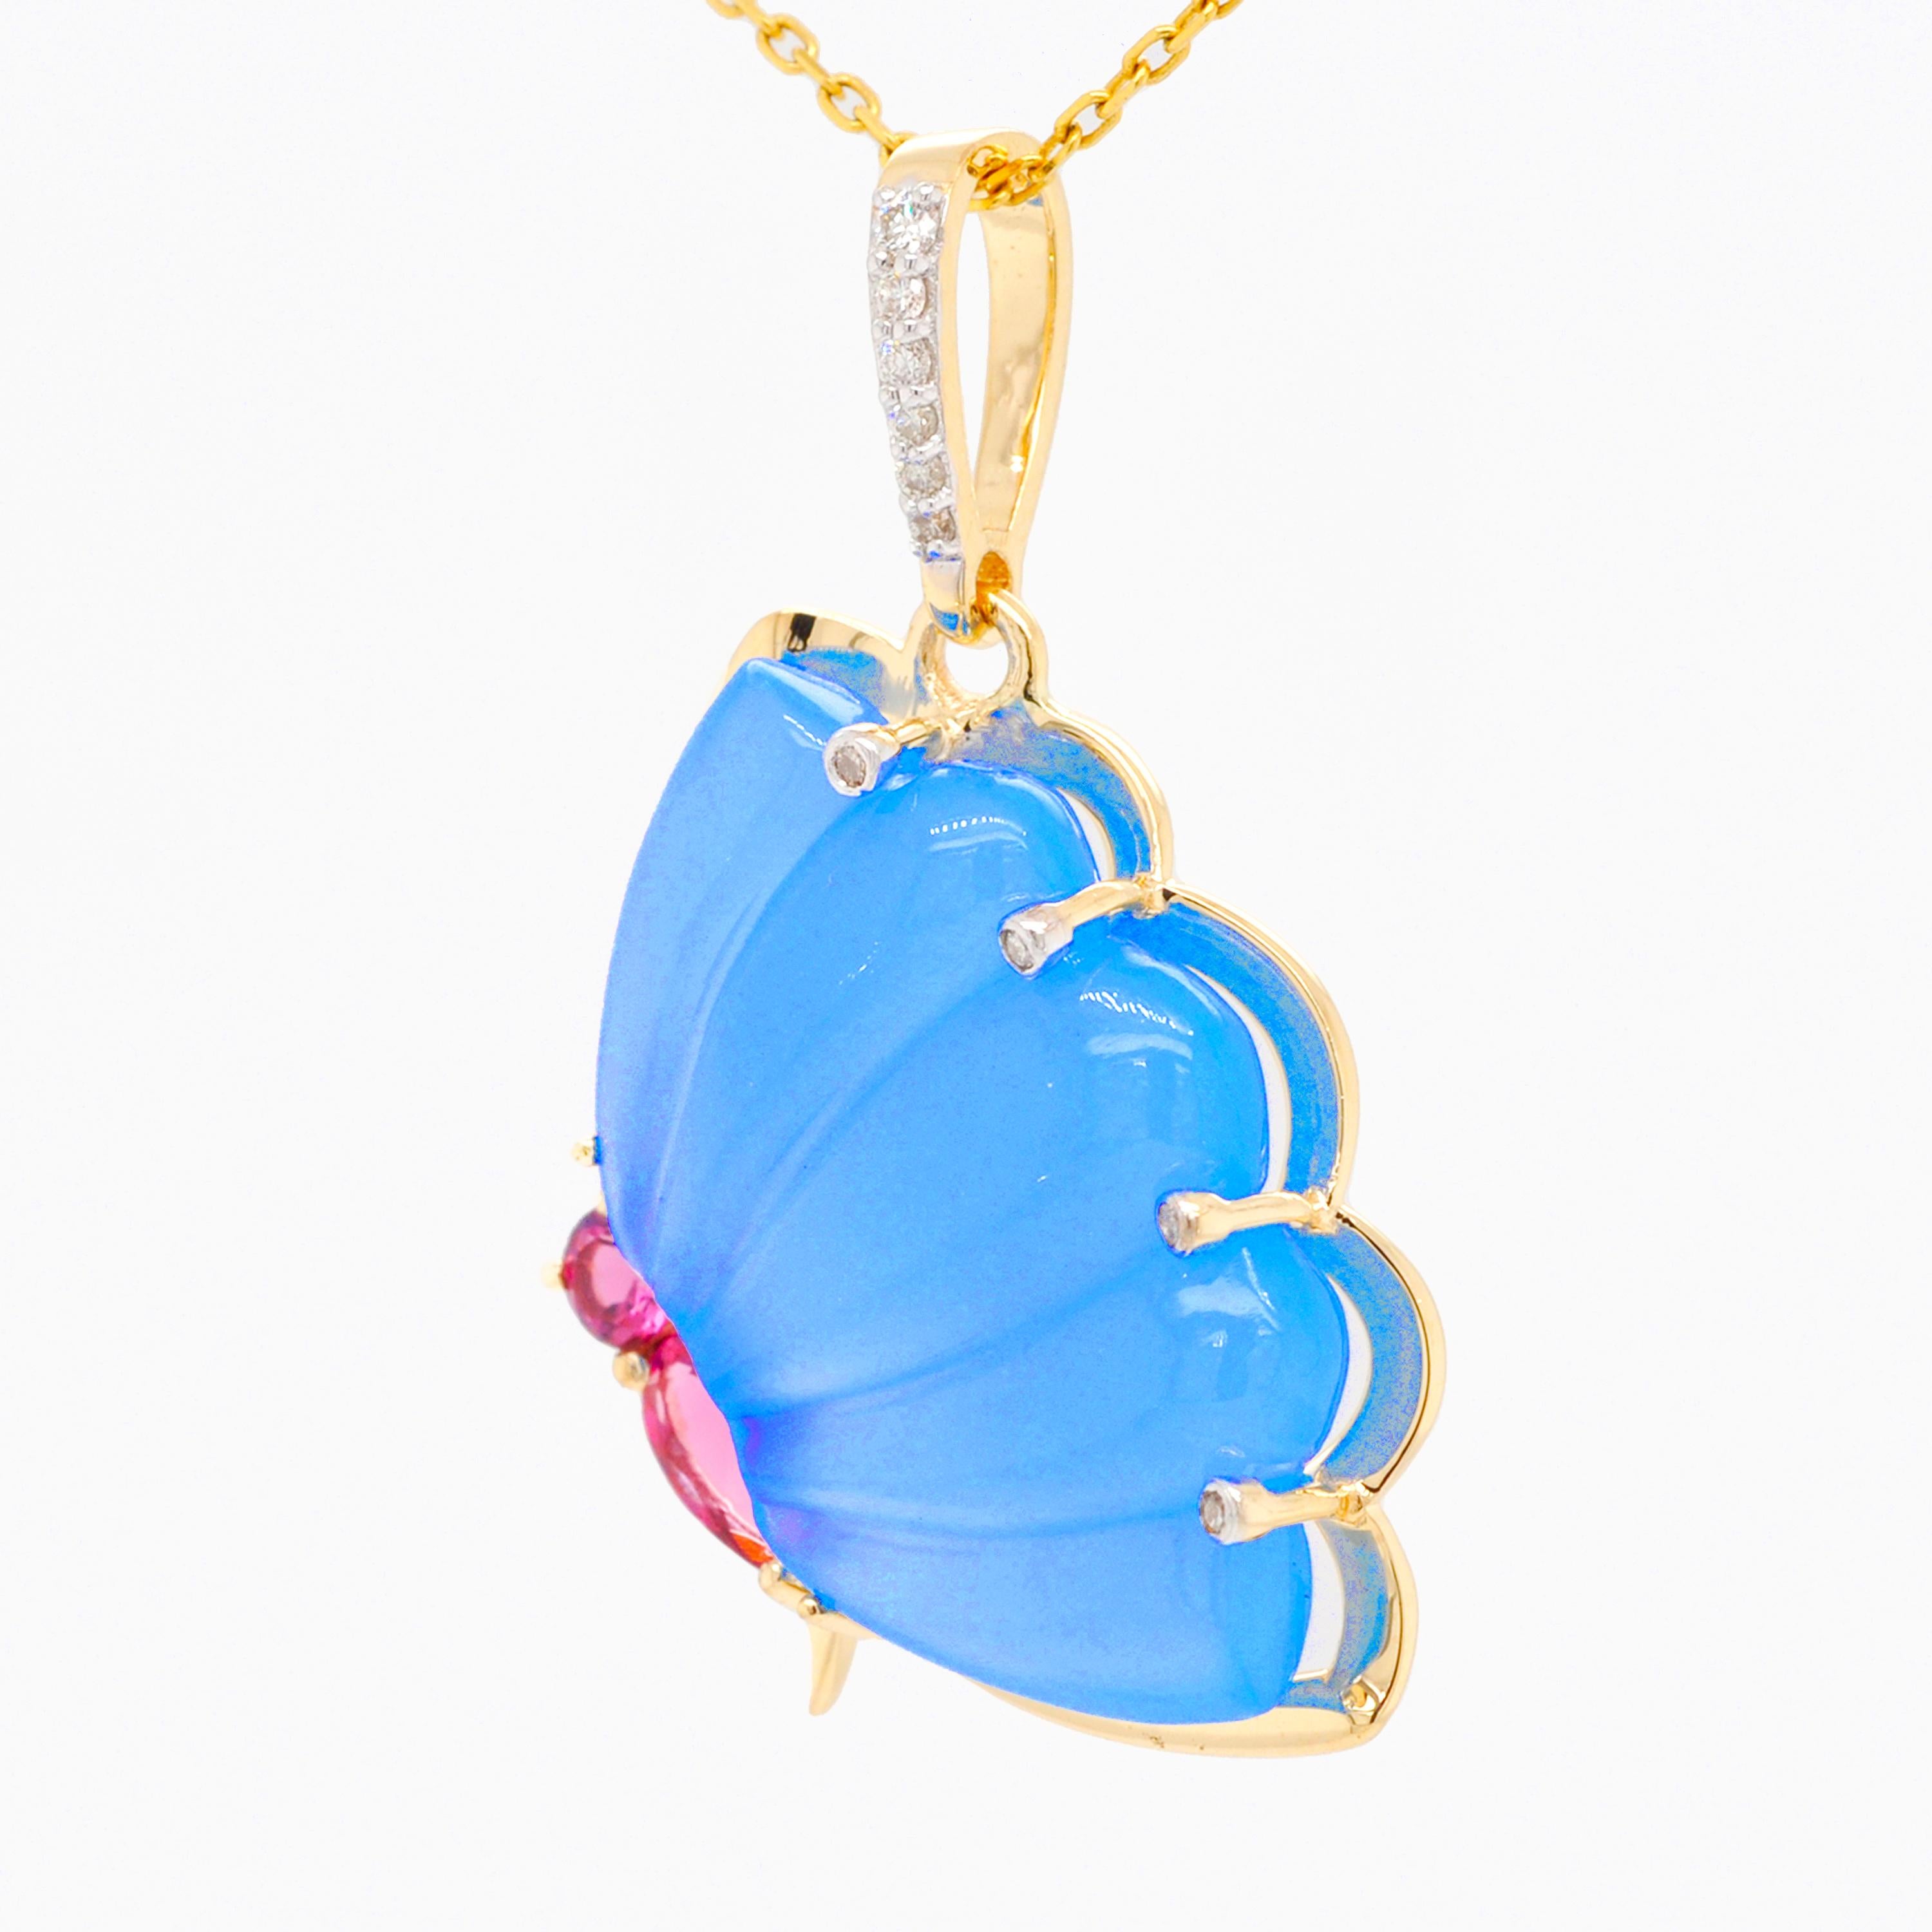 Contemporary 18 Karat Gold Pink Tourmaline Blue Chalcedony Butterfly Carving Diamond Pendant For Sale